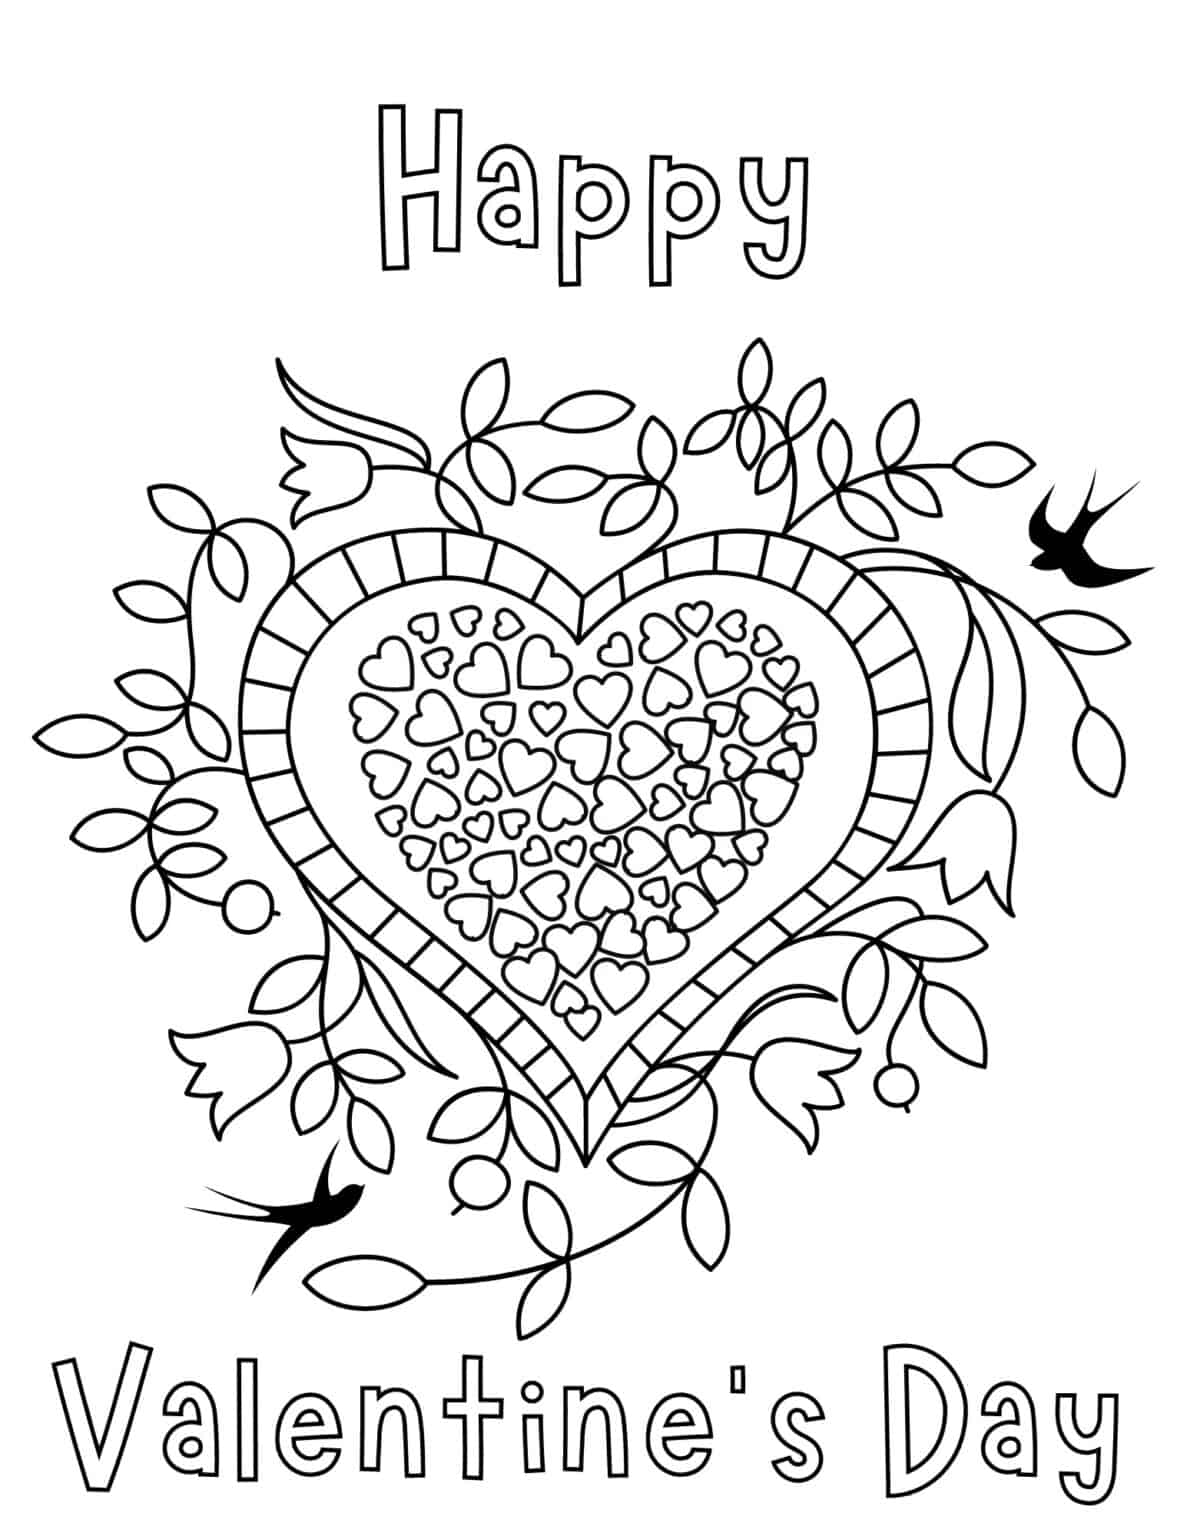 20 Free Valentine's Day Coloring Pages for Kids - Prudent Penny Pincher